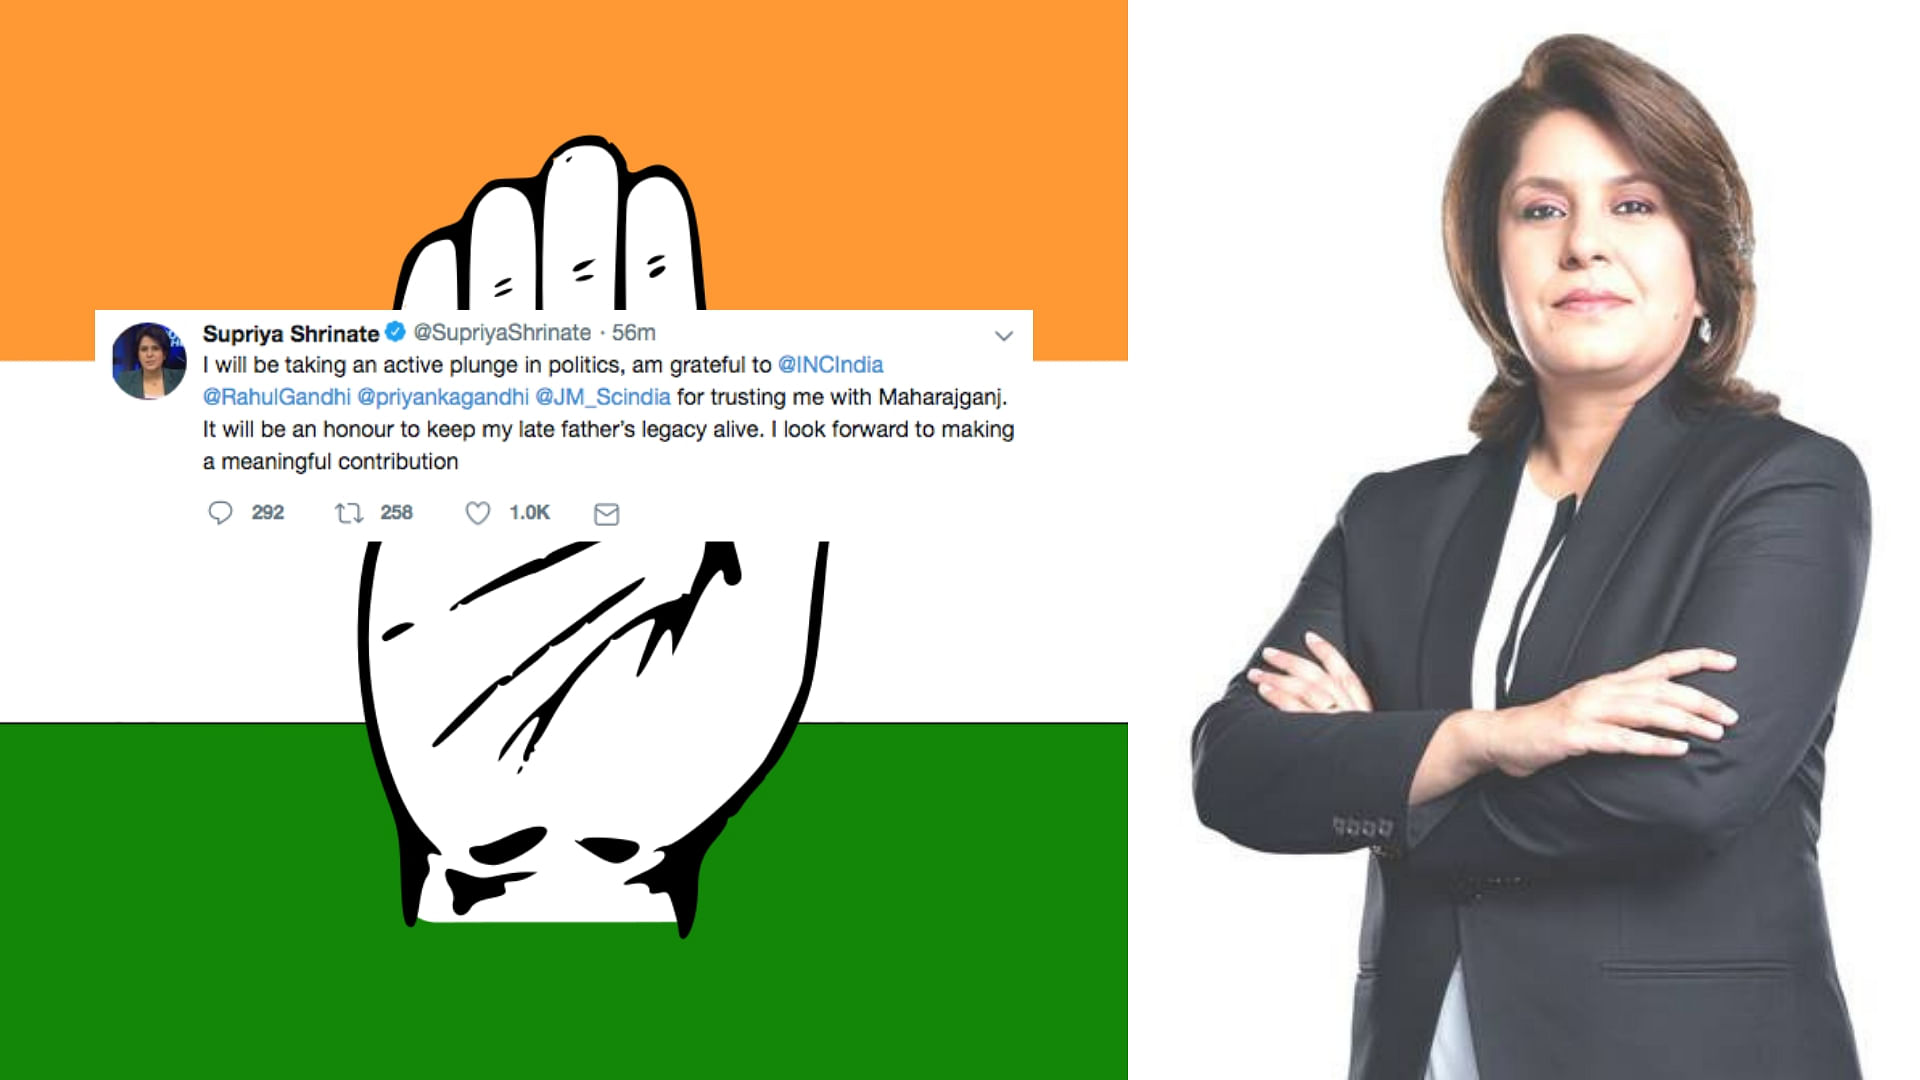 In a tweet, Shrinate thanked Congress President Rahul Gandhi for trusting her with the Maharajganj seat.